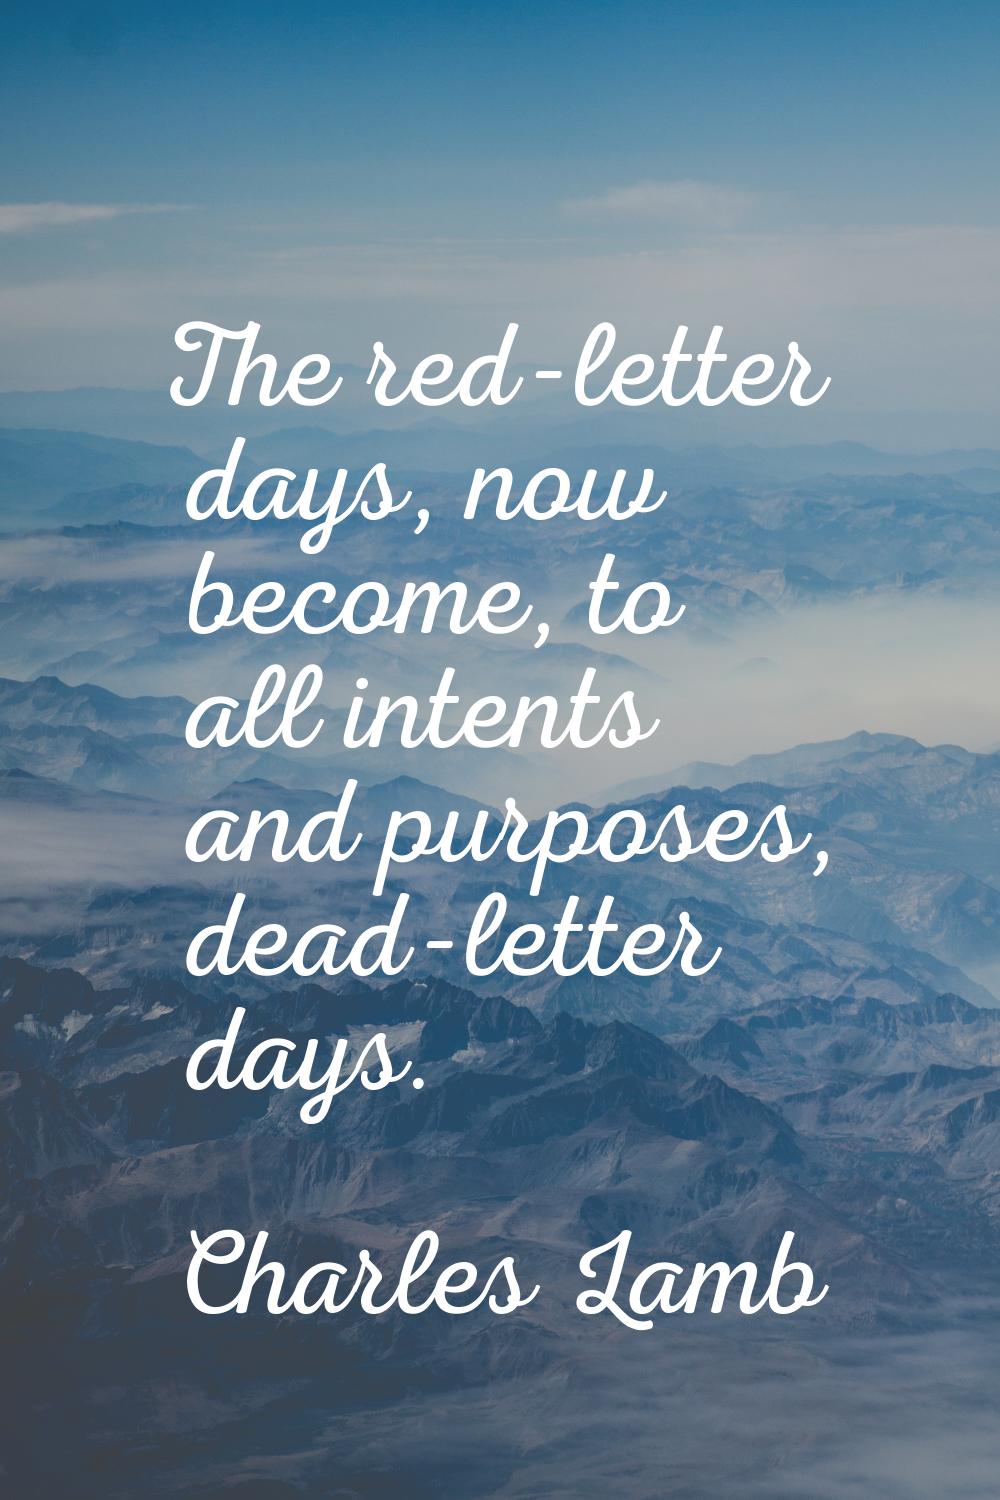 The red-letter days, now become, to all intents and purposes, dead-letter days.